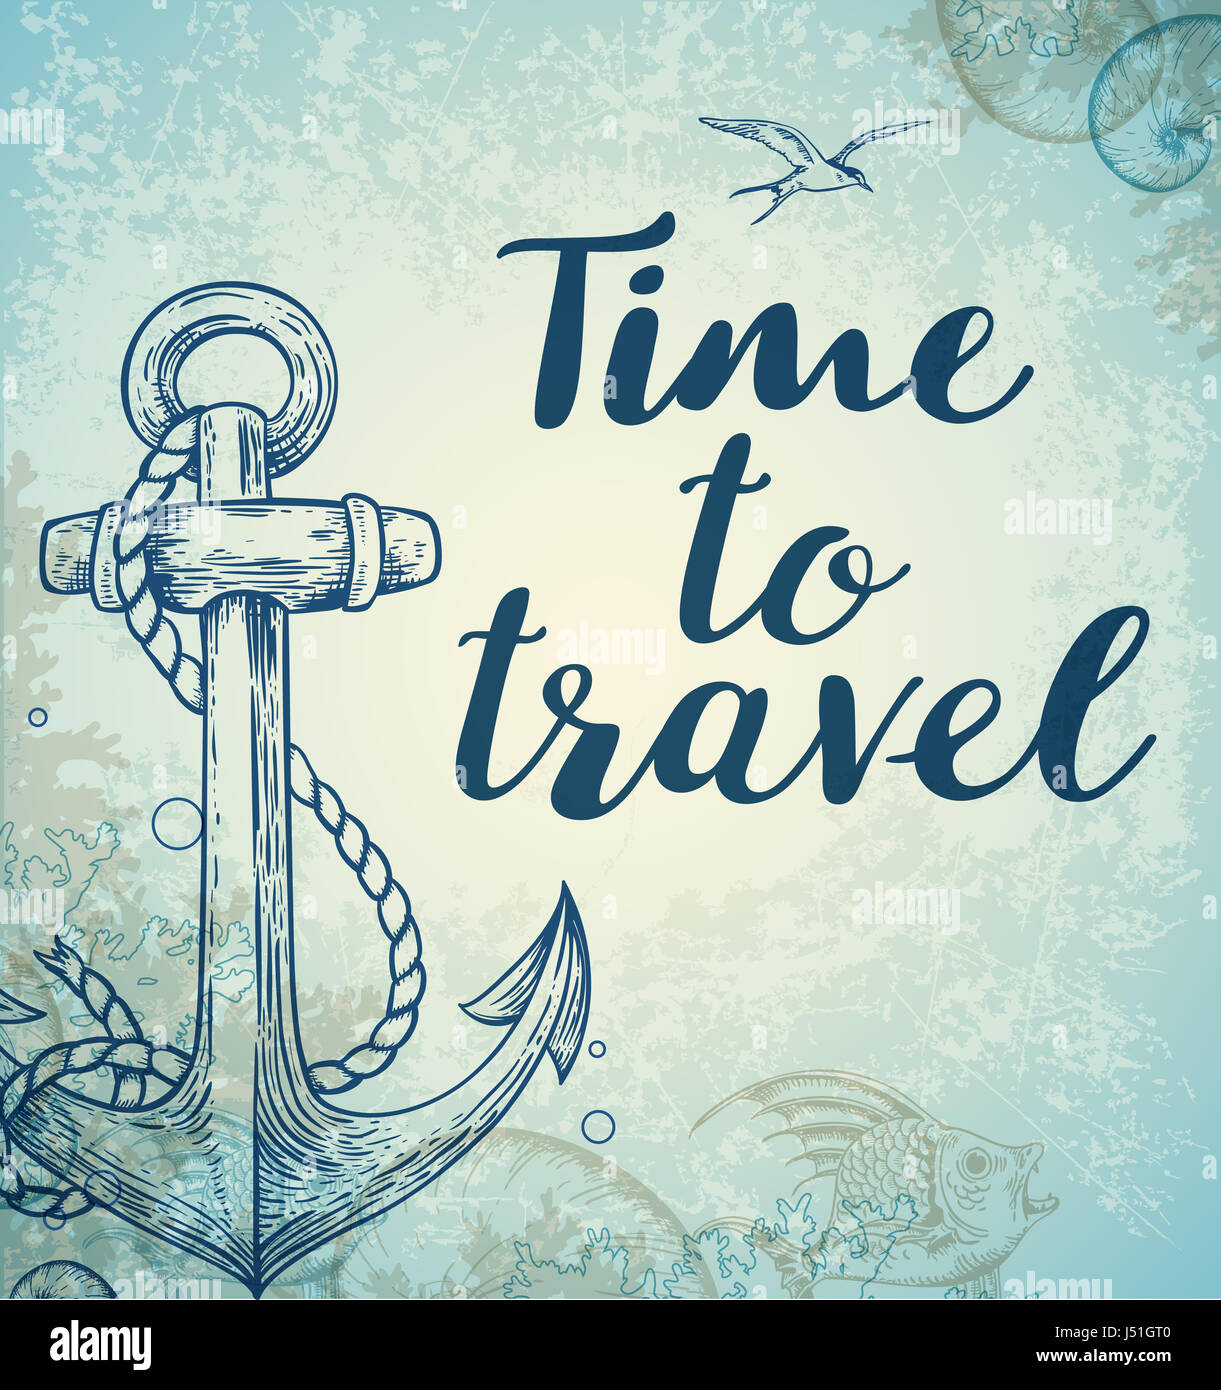 Vintage travel background with anchor and fish. Hand drawn  illustration. Time to travel lettering. Stock Photo